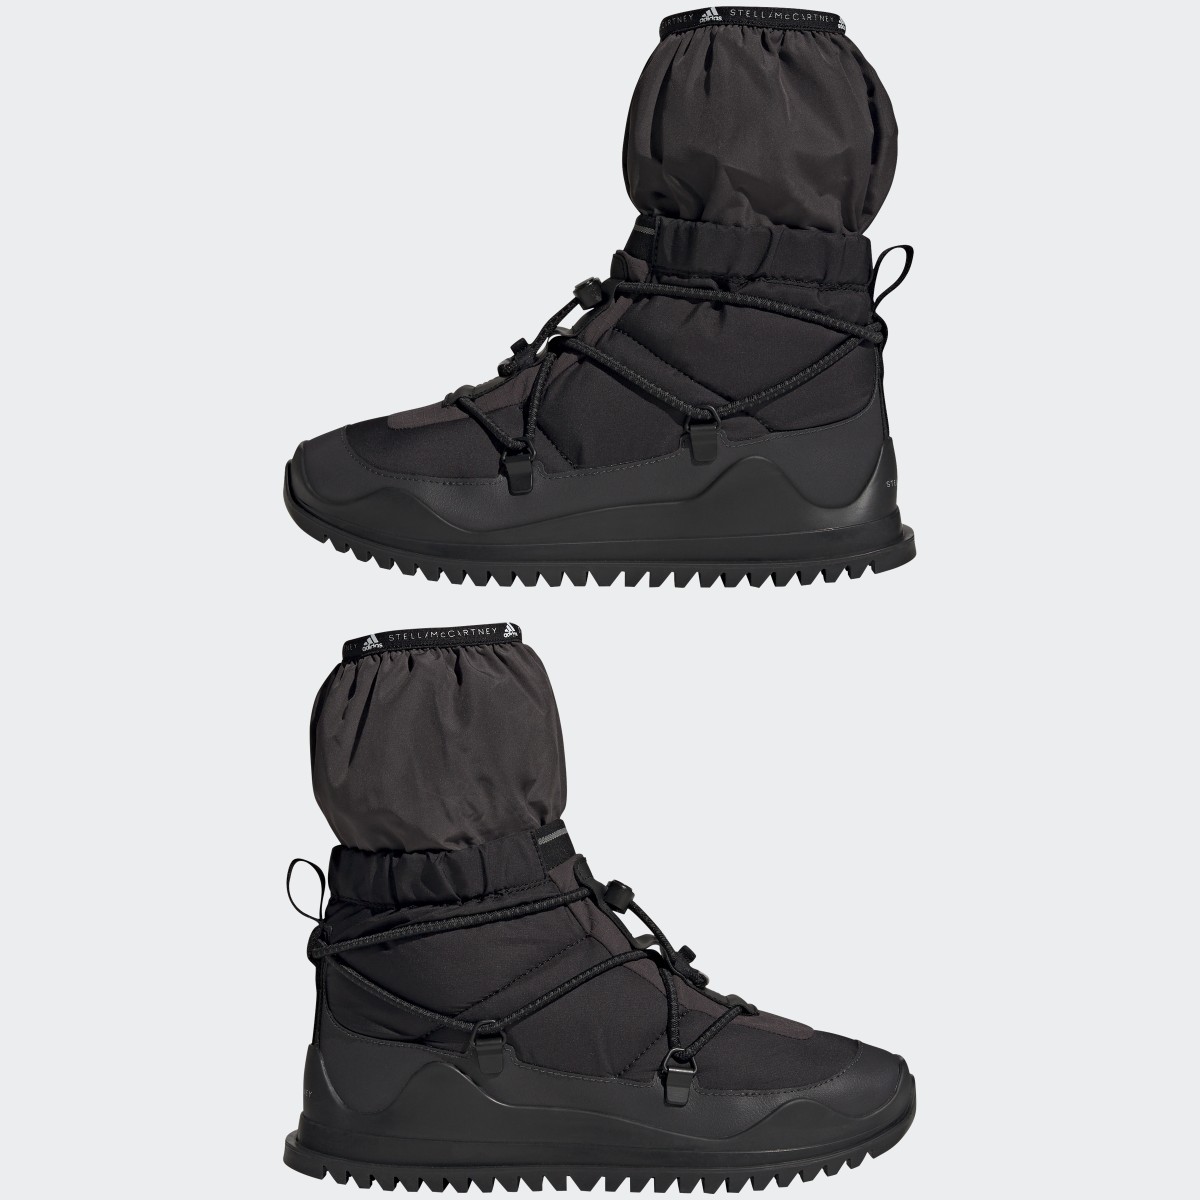 Adidas by Stella McCartney Winter COLD.RDY Boot. 8